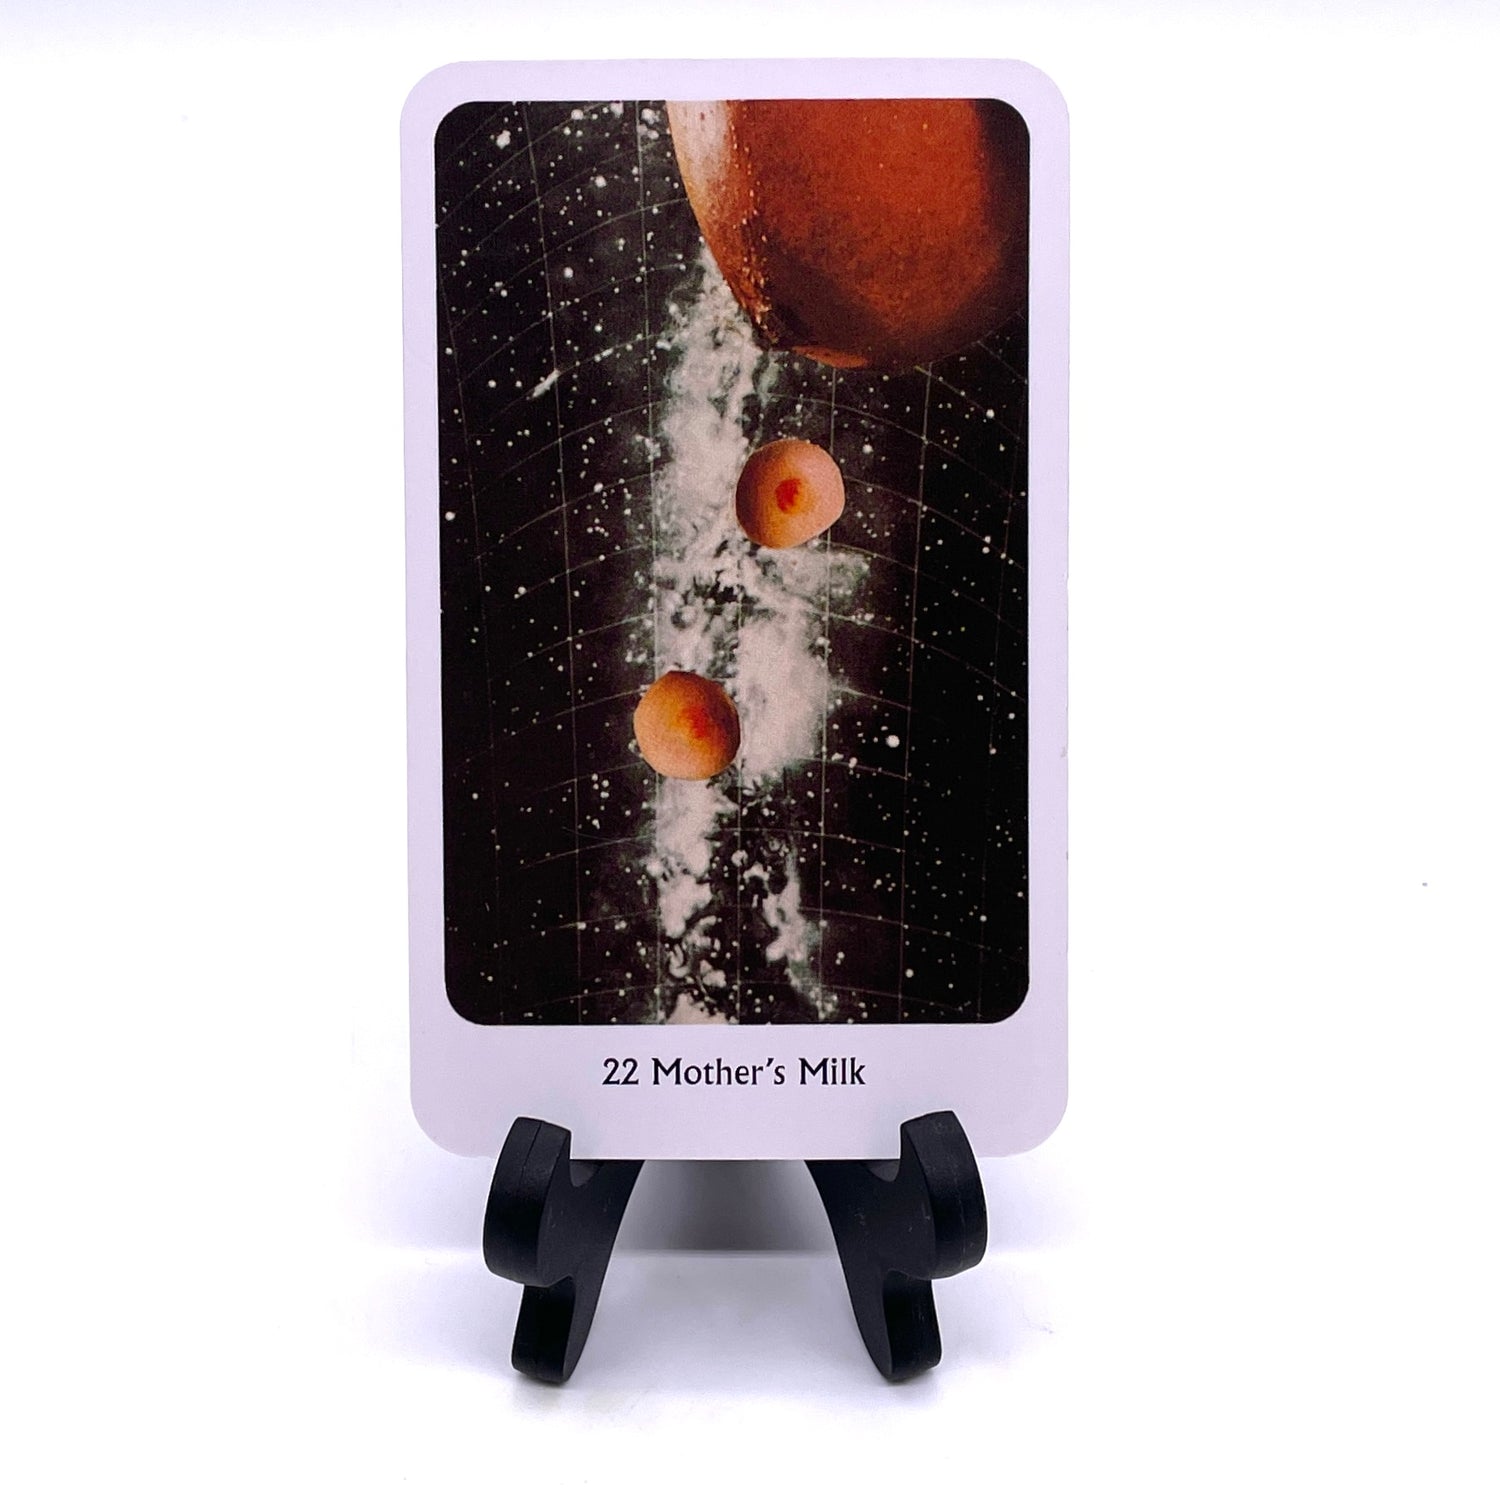 Photo of Card #22 "Mother's Milk", featuring collaged images of breasts against a grided Milky Way background.